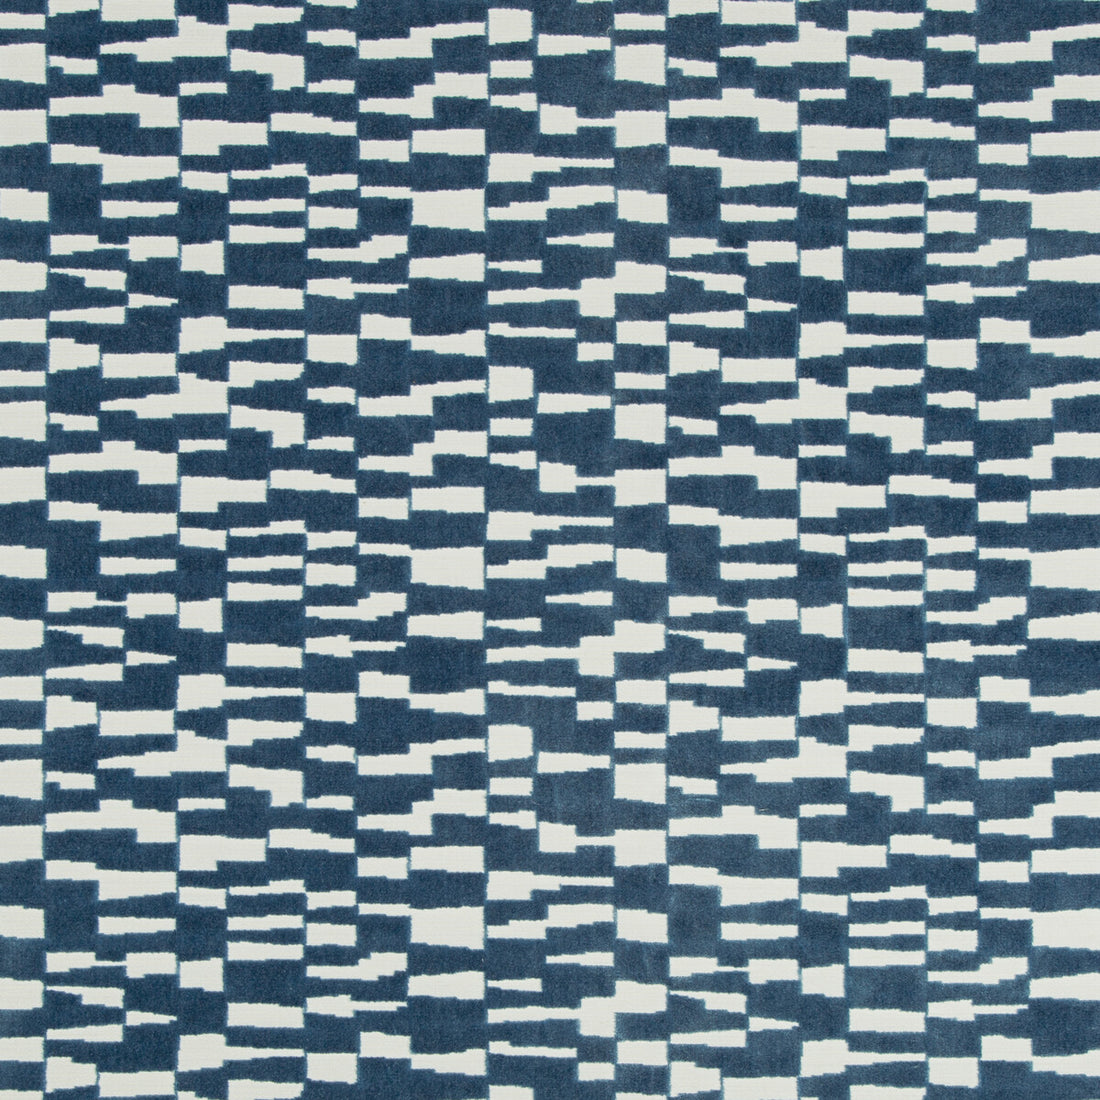 Mod Velvet fabric in marine color - pattern 35544.5.0 - by Kravet Basics in the Bermuda collection